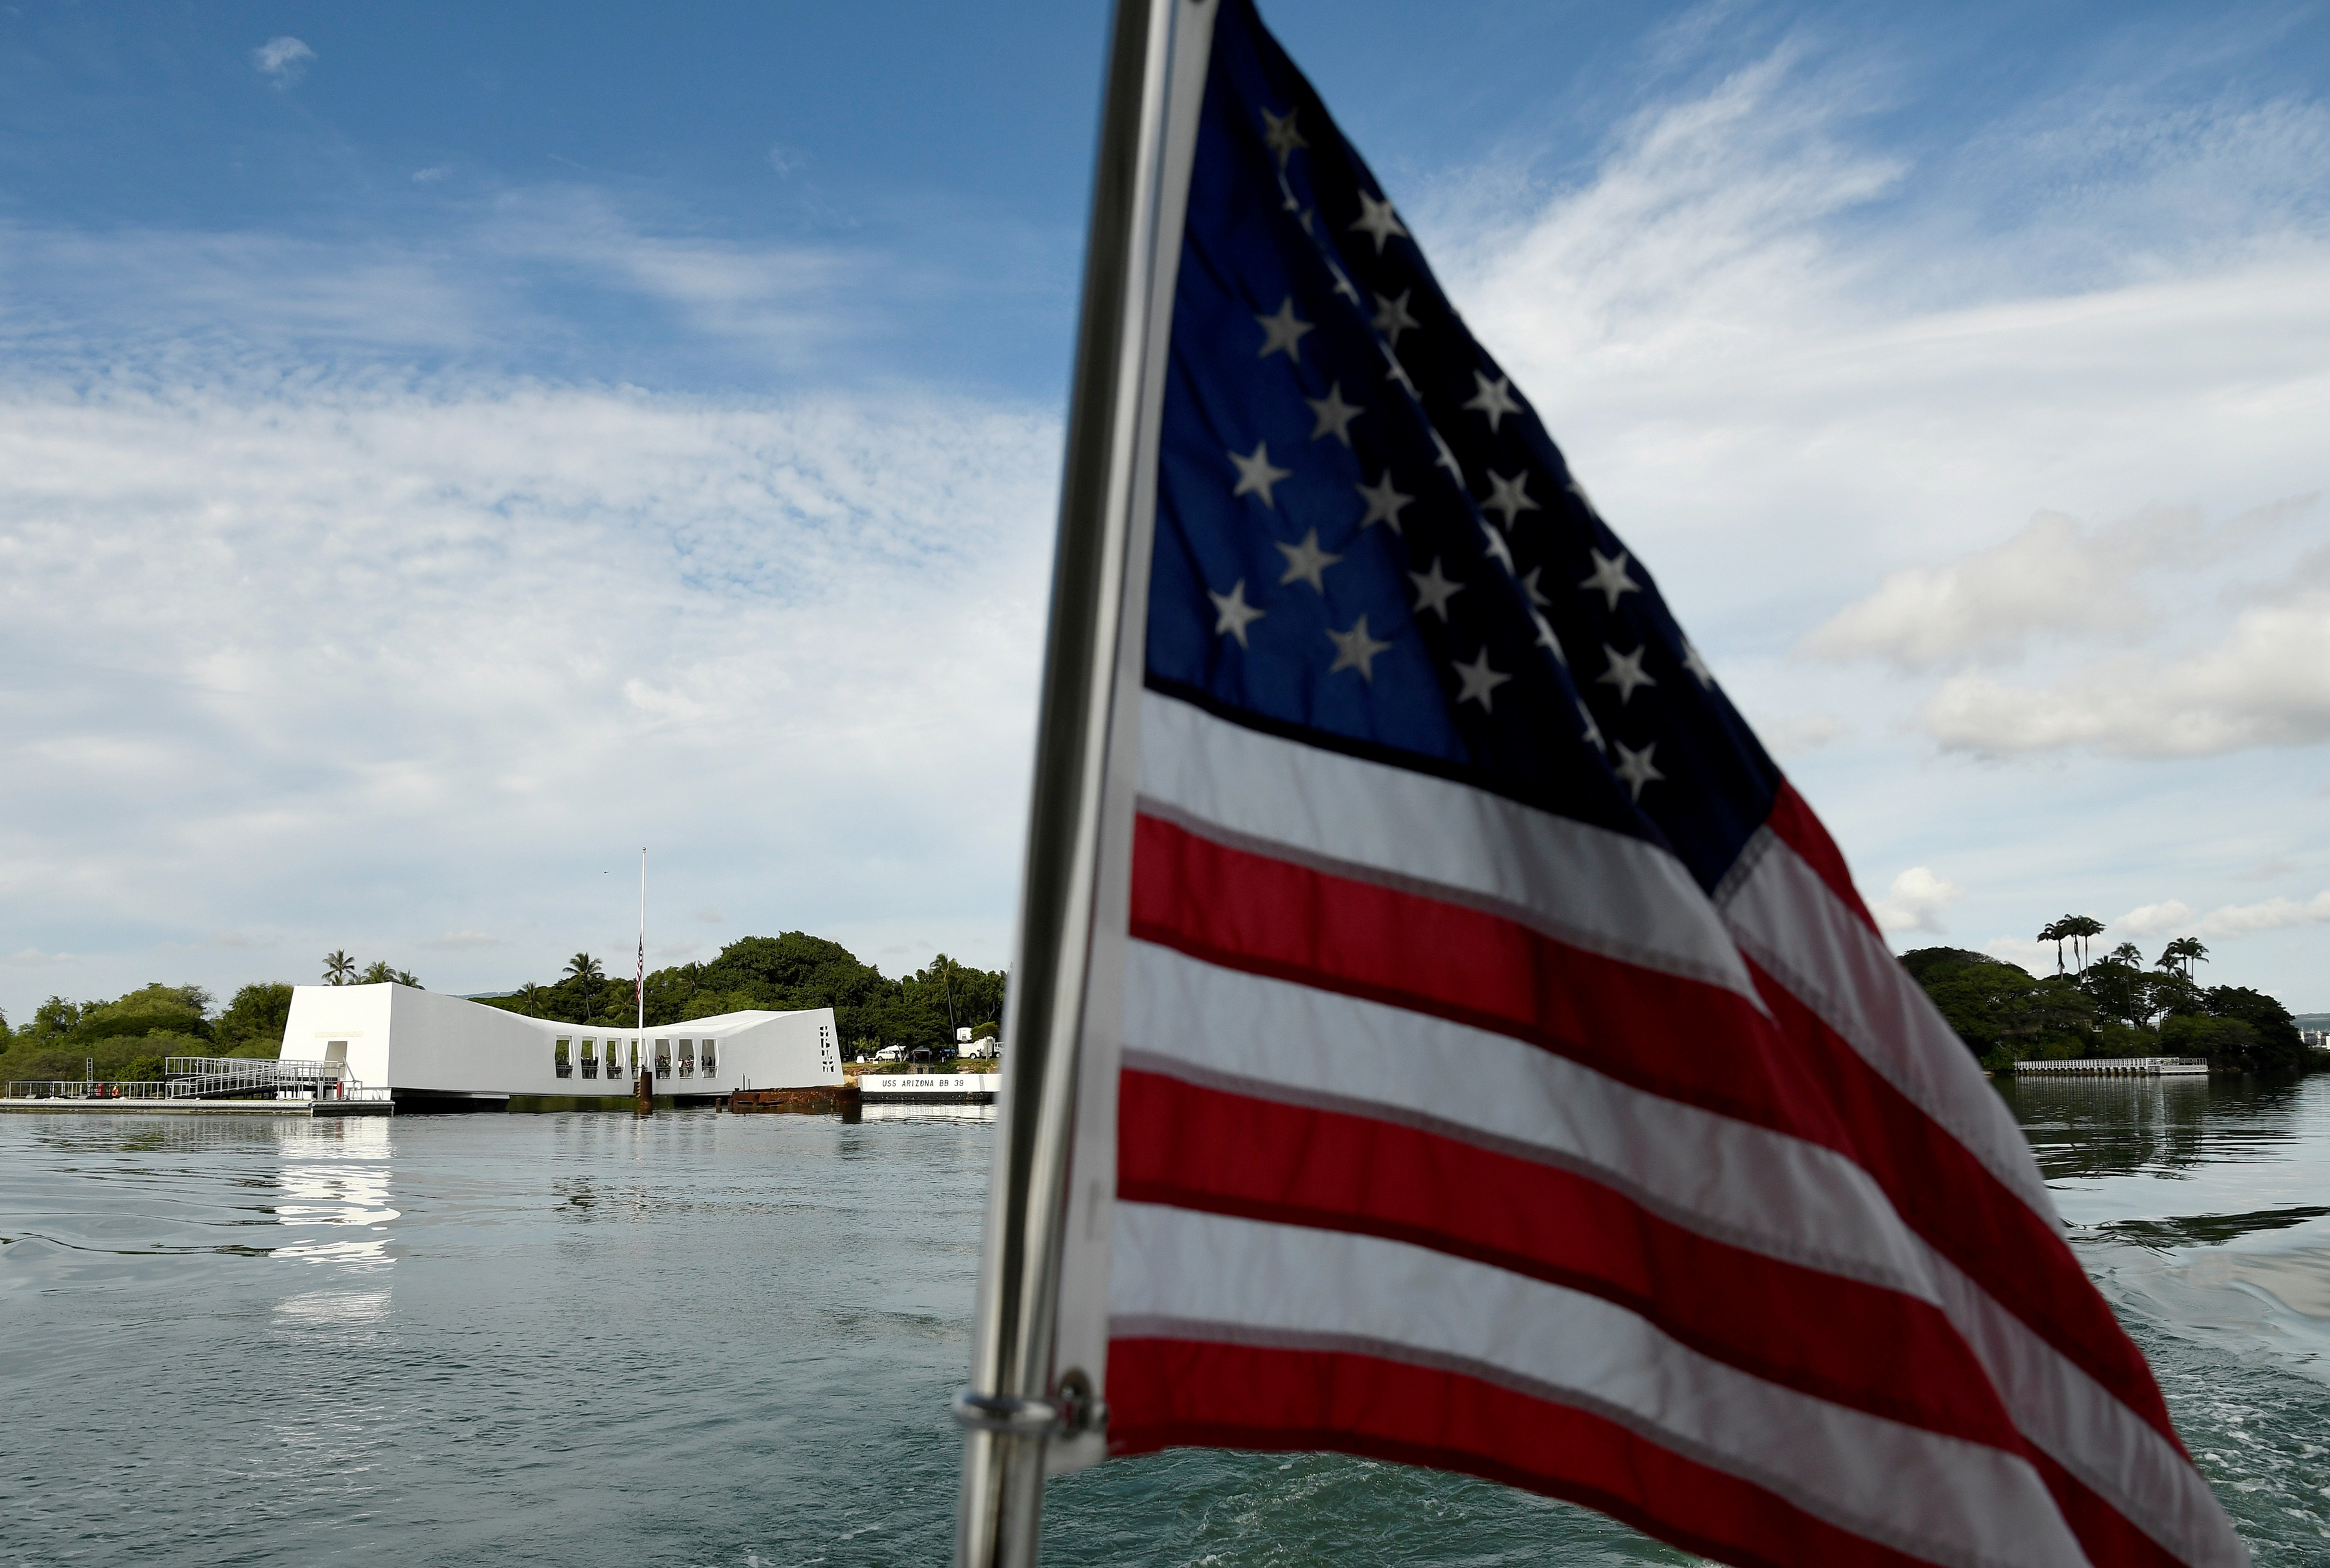 The USS Arizona Memorial can be seen from a shuttle boat during the 75th anniversary of the attack on Pearl Harbor in Honolulu, Hawaii.